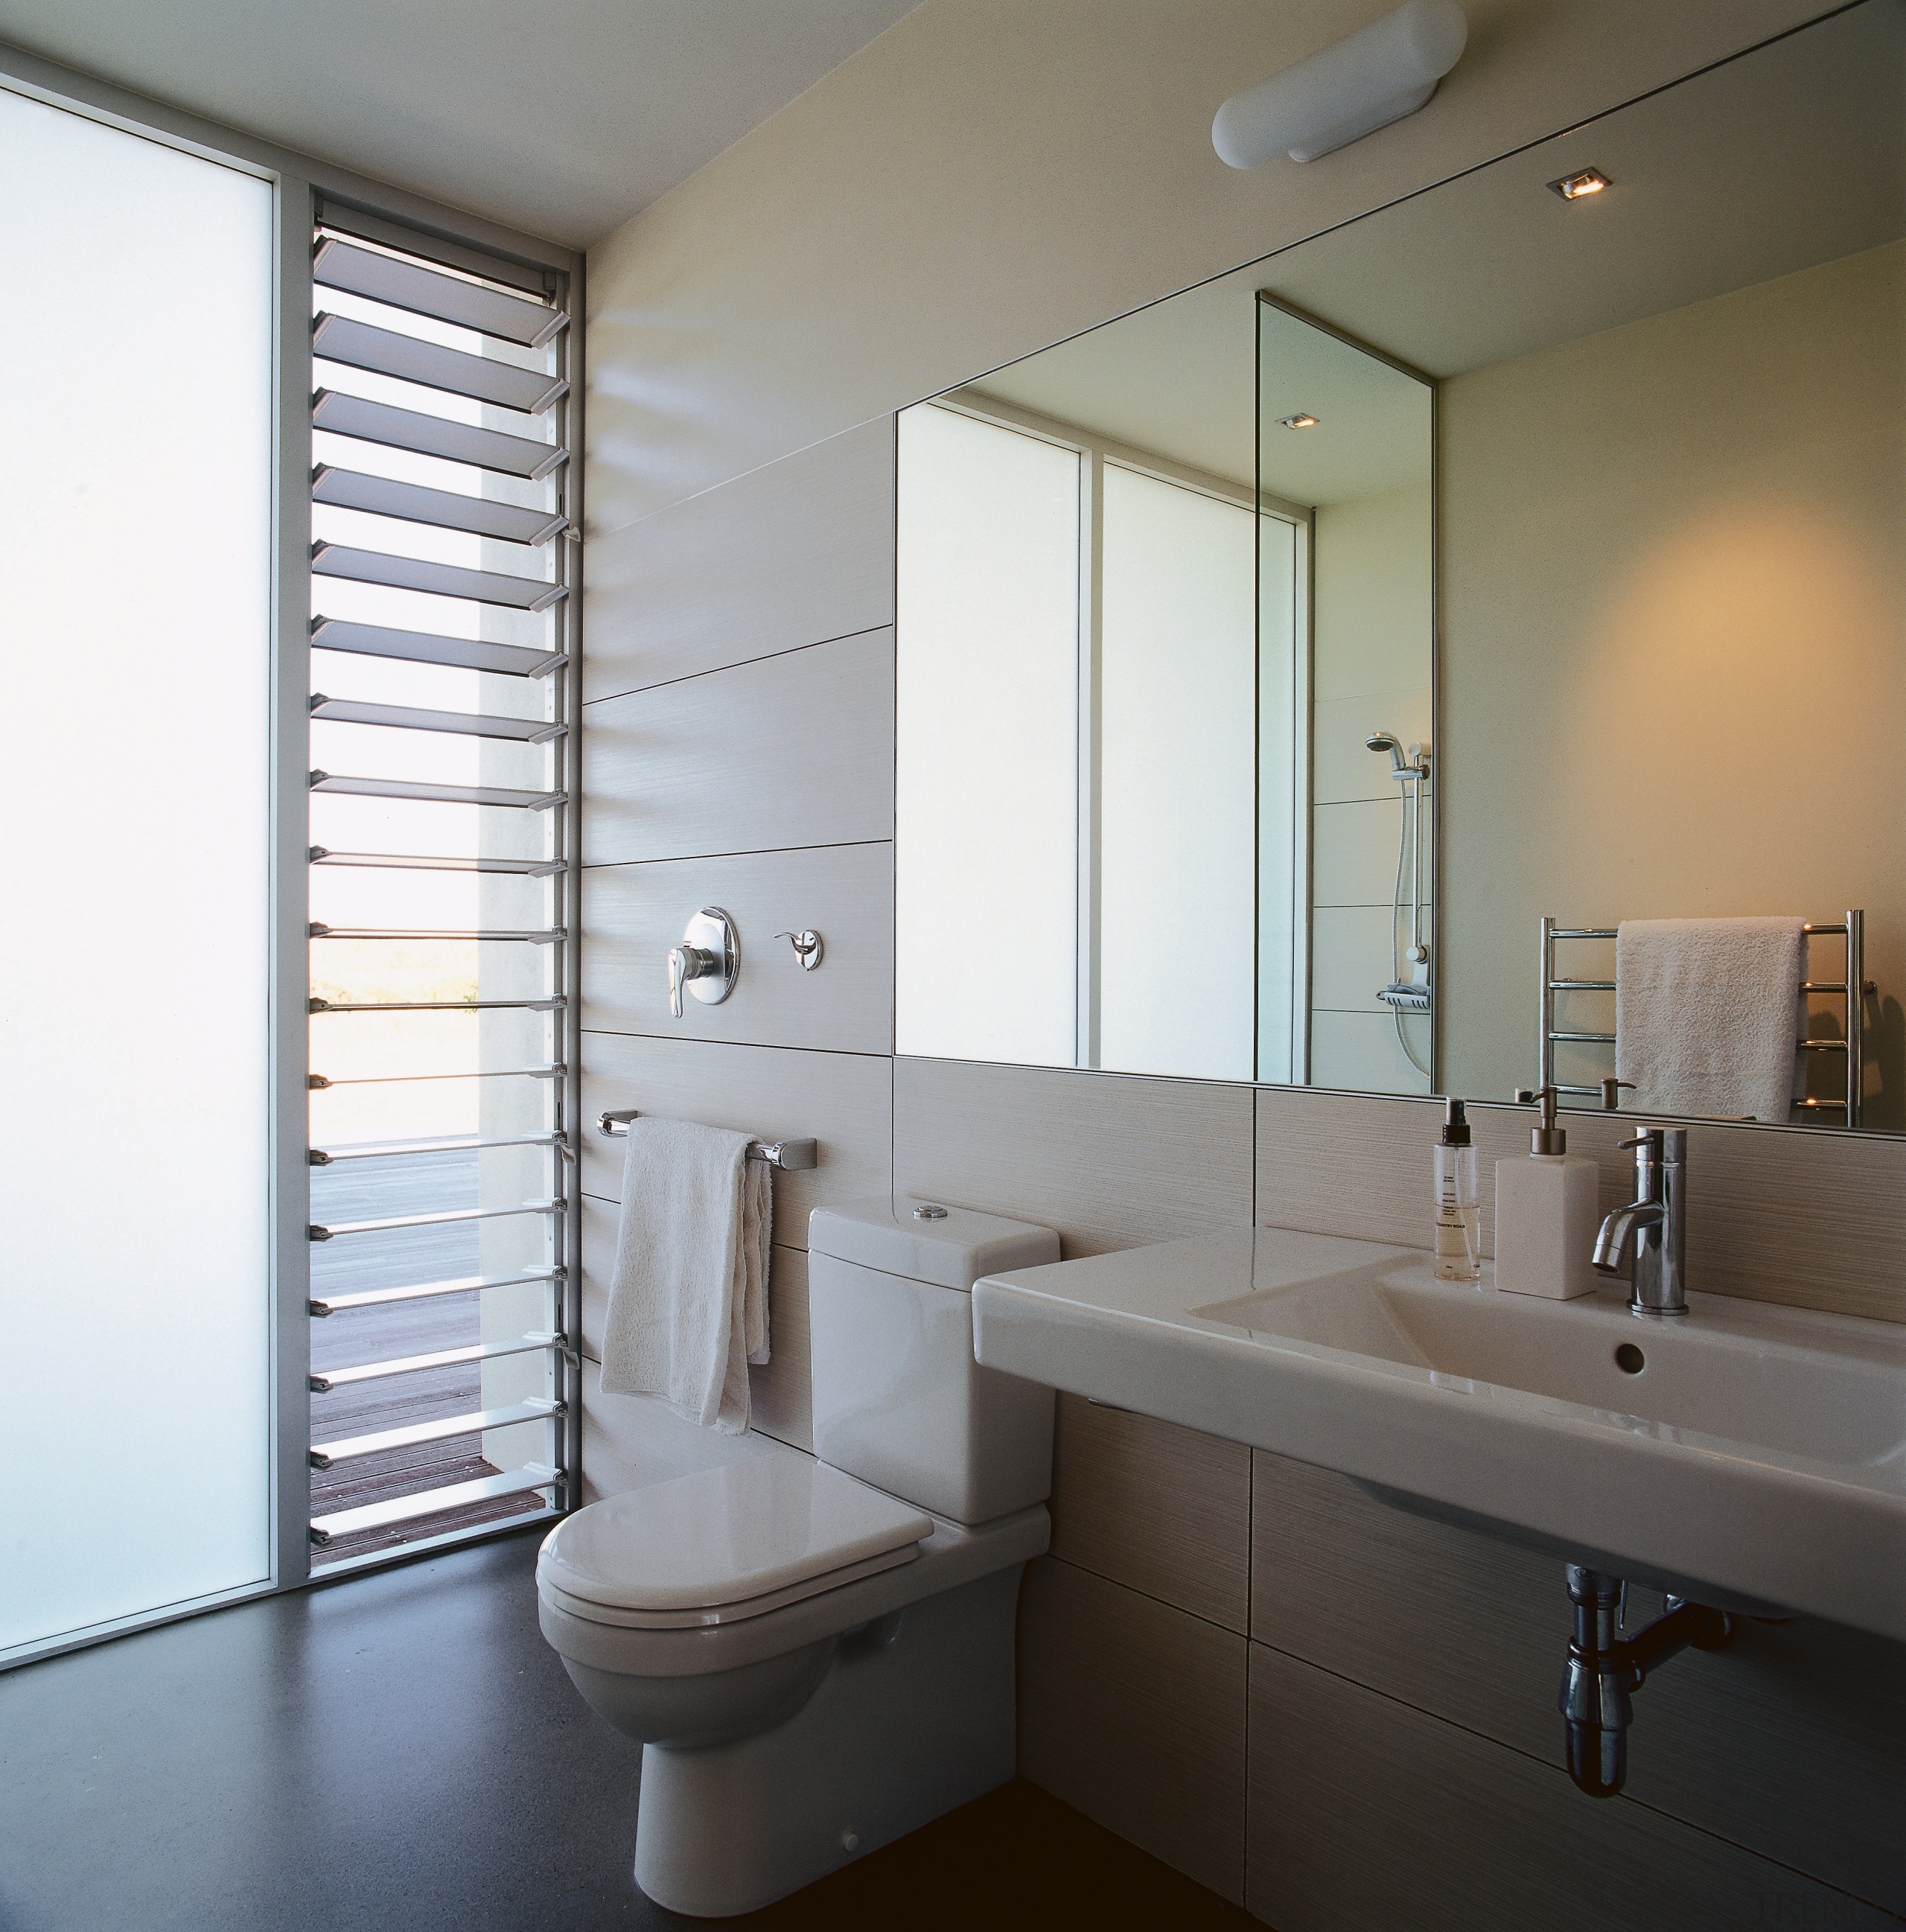 A view of this clean streamlined bathroom featuring architecture, bathroom, bathroom accessory, bathroom cabinet, daylighting, home, interior design, plumbing fixture, room, sink, window, white, gray